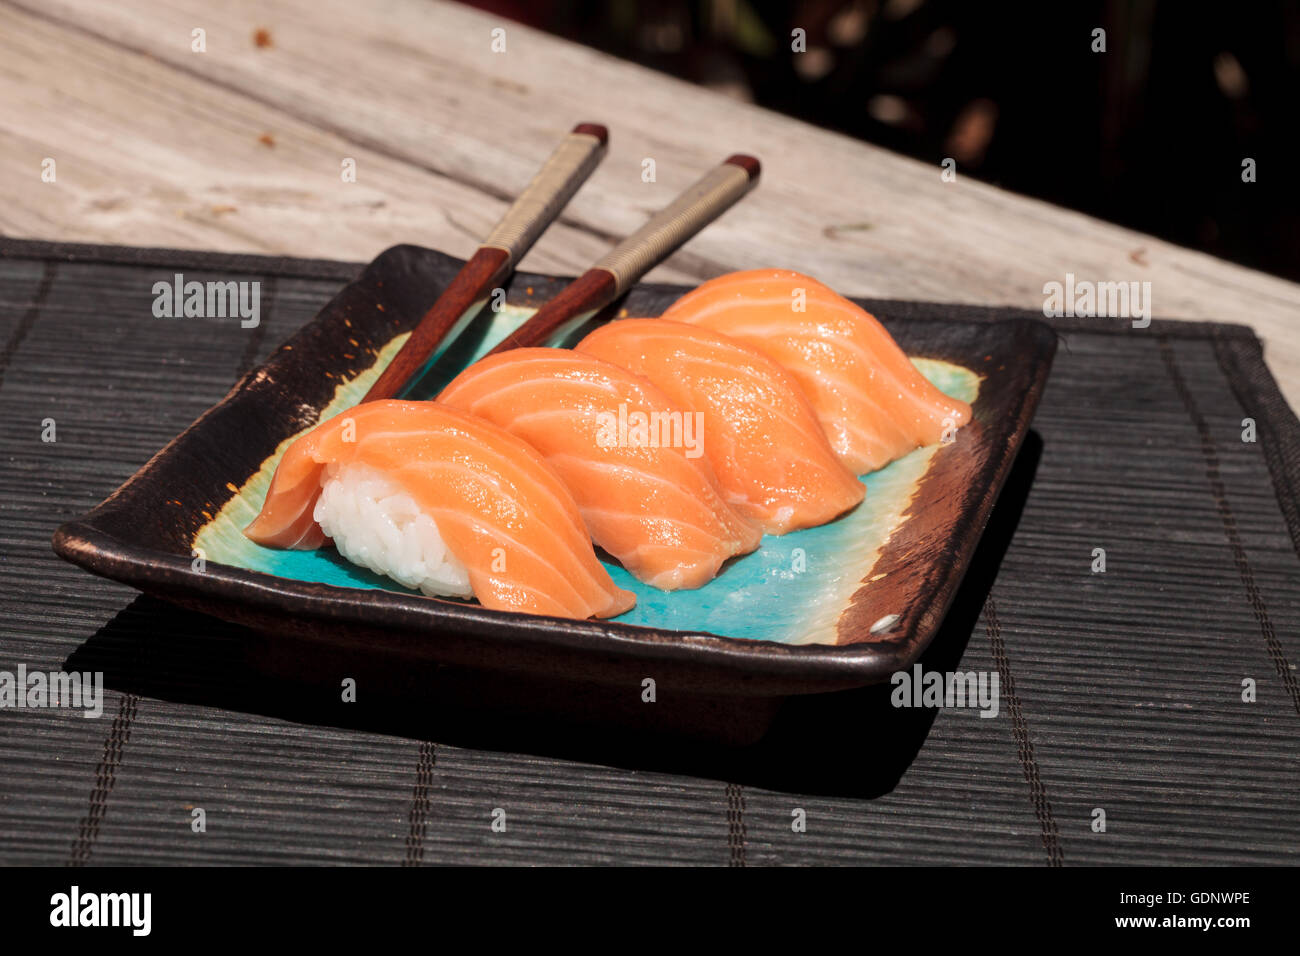 A meal of salmon sushi on white rice on a blue plate with chopsticks. Stock Photo